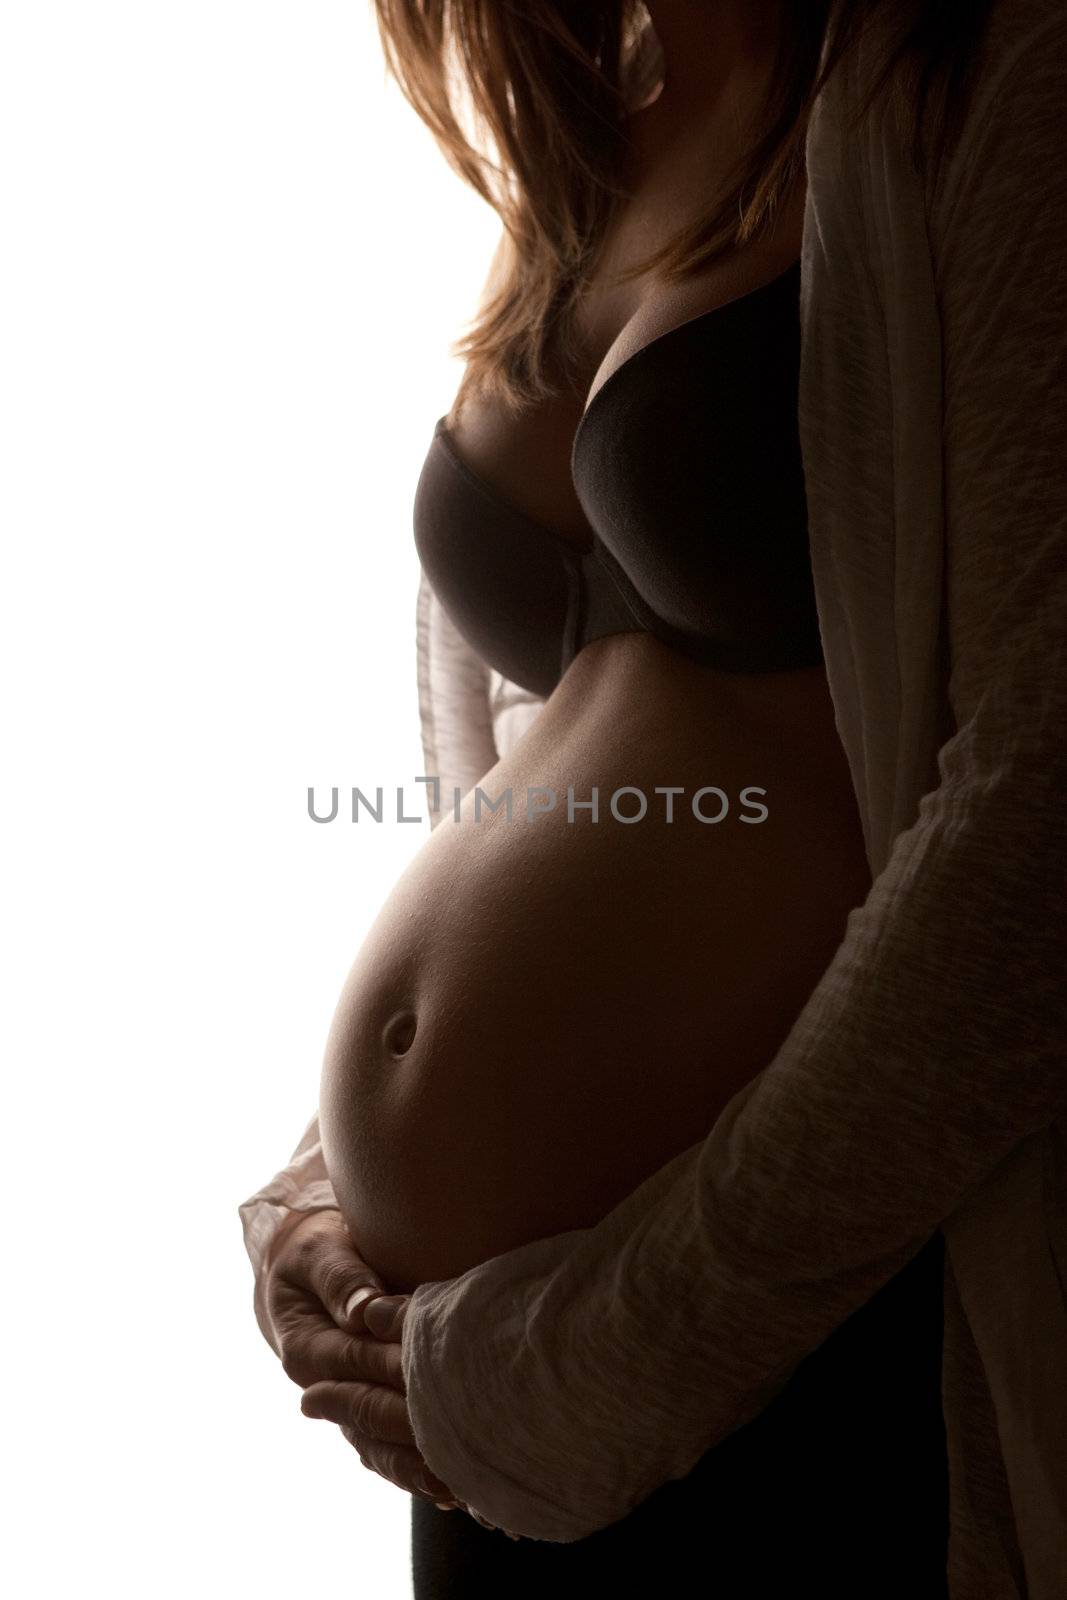 Expectant Mother by svenler